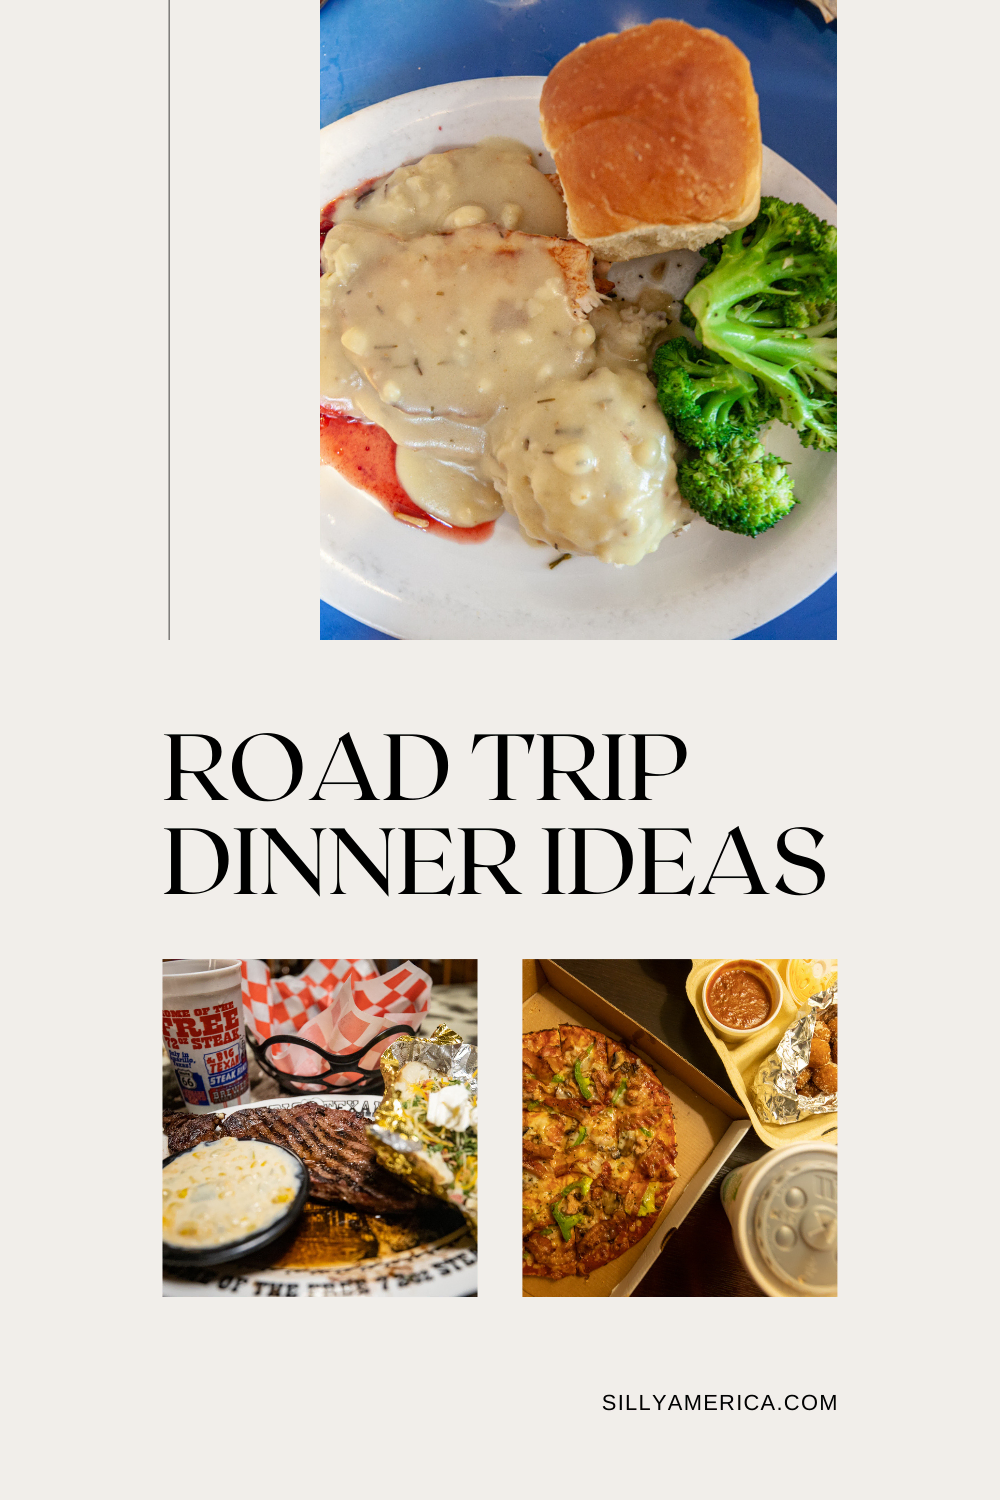 When you've been on the road all day, there's nothing like a good meal to top it all off. So what are some good road trip dinner ideas? Whether it's late at night and you want grab and go fast food, want to try out a local delicacy at a diner or restaurant, want to order in for dinner in bed, or prefer to save money and time by packing make ahead dinners in the cooler or cooking at your AirBNB, the best road trip dinner is the one you're eating tonight. #RoadTrip #RoadTripDinnerIdeas